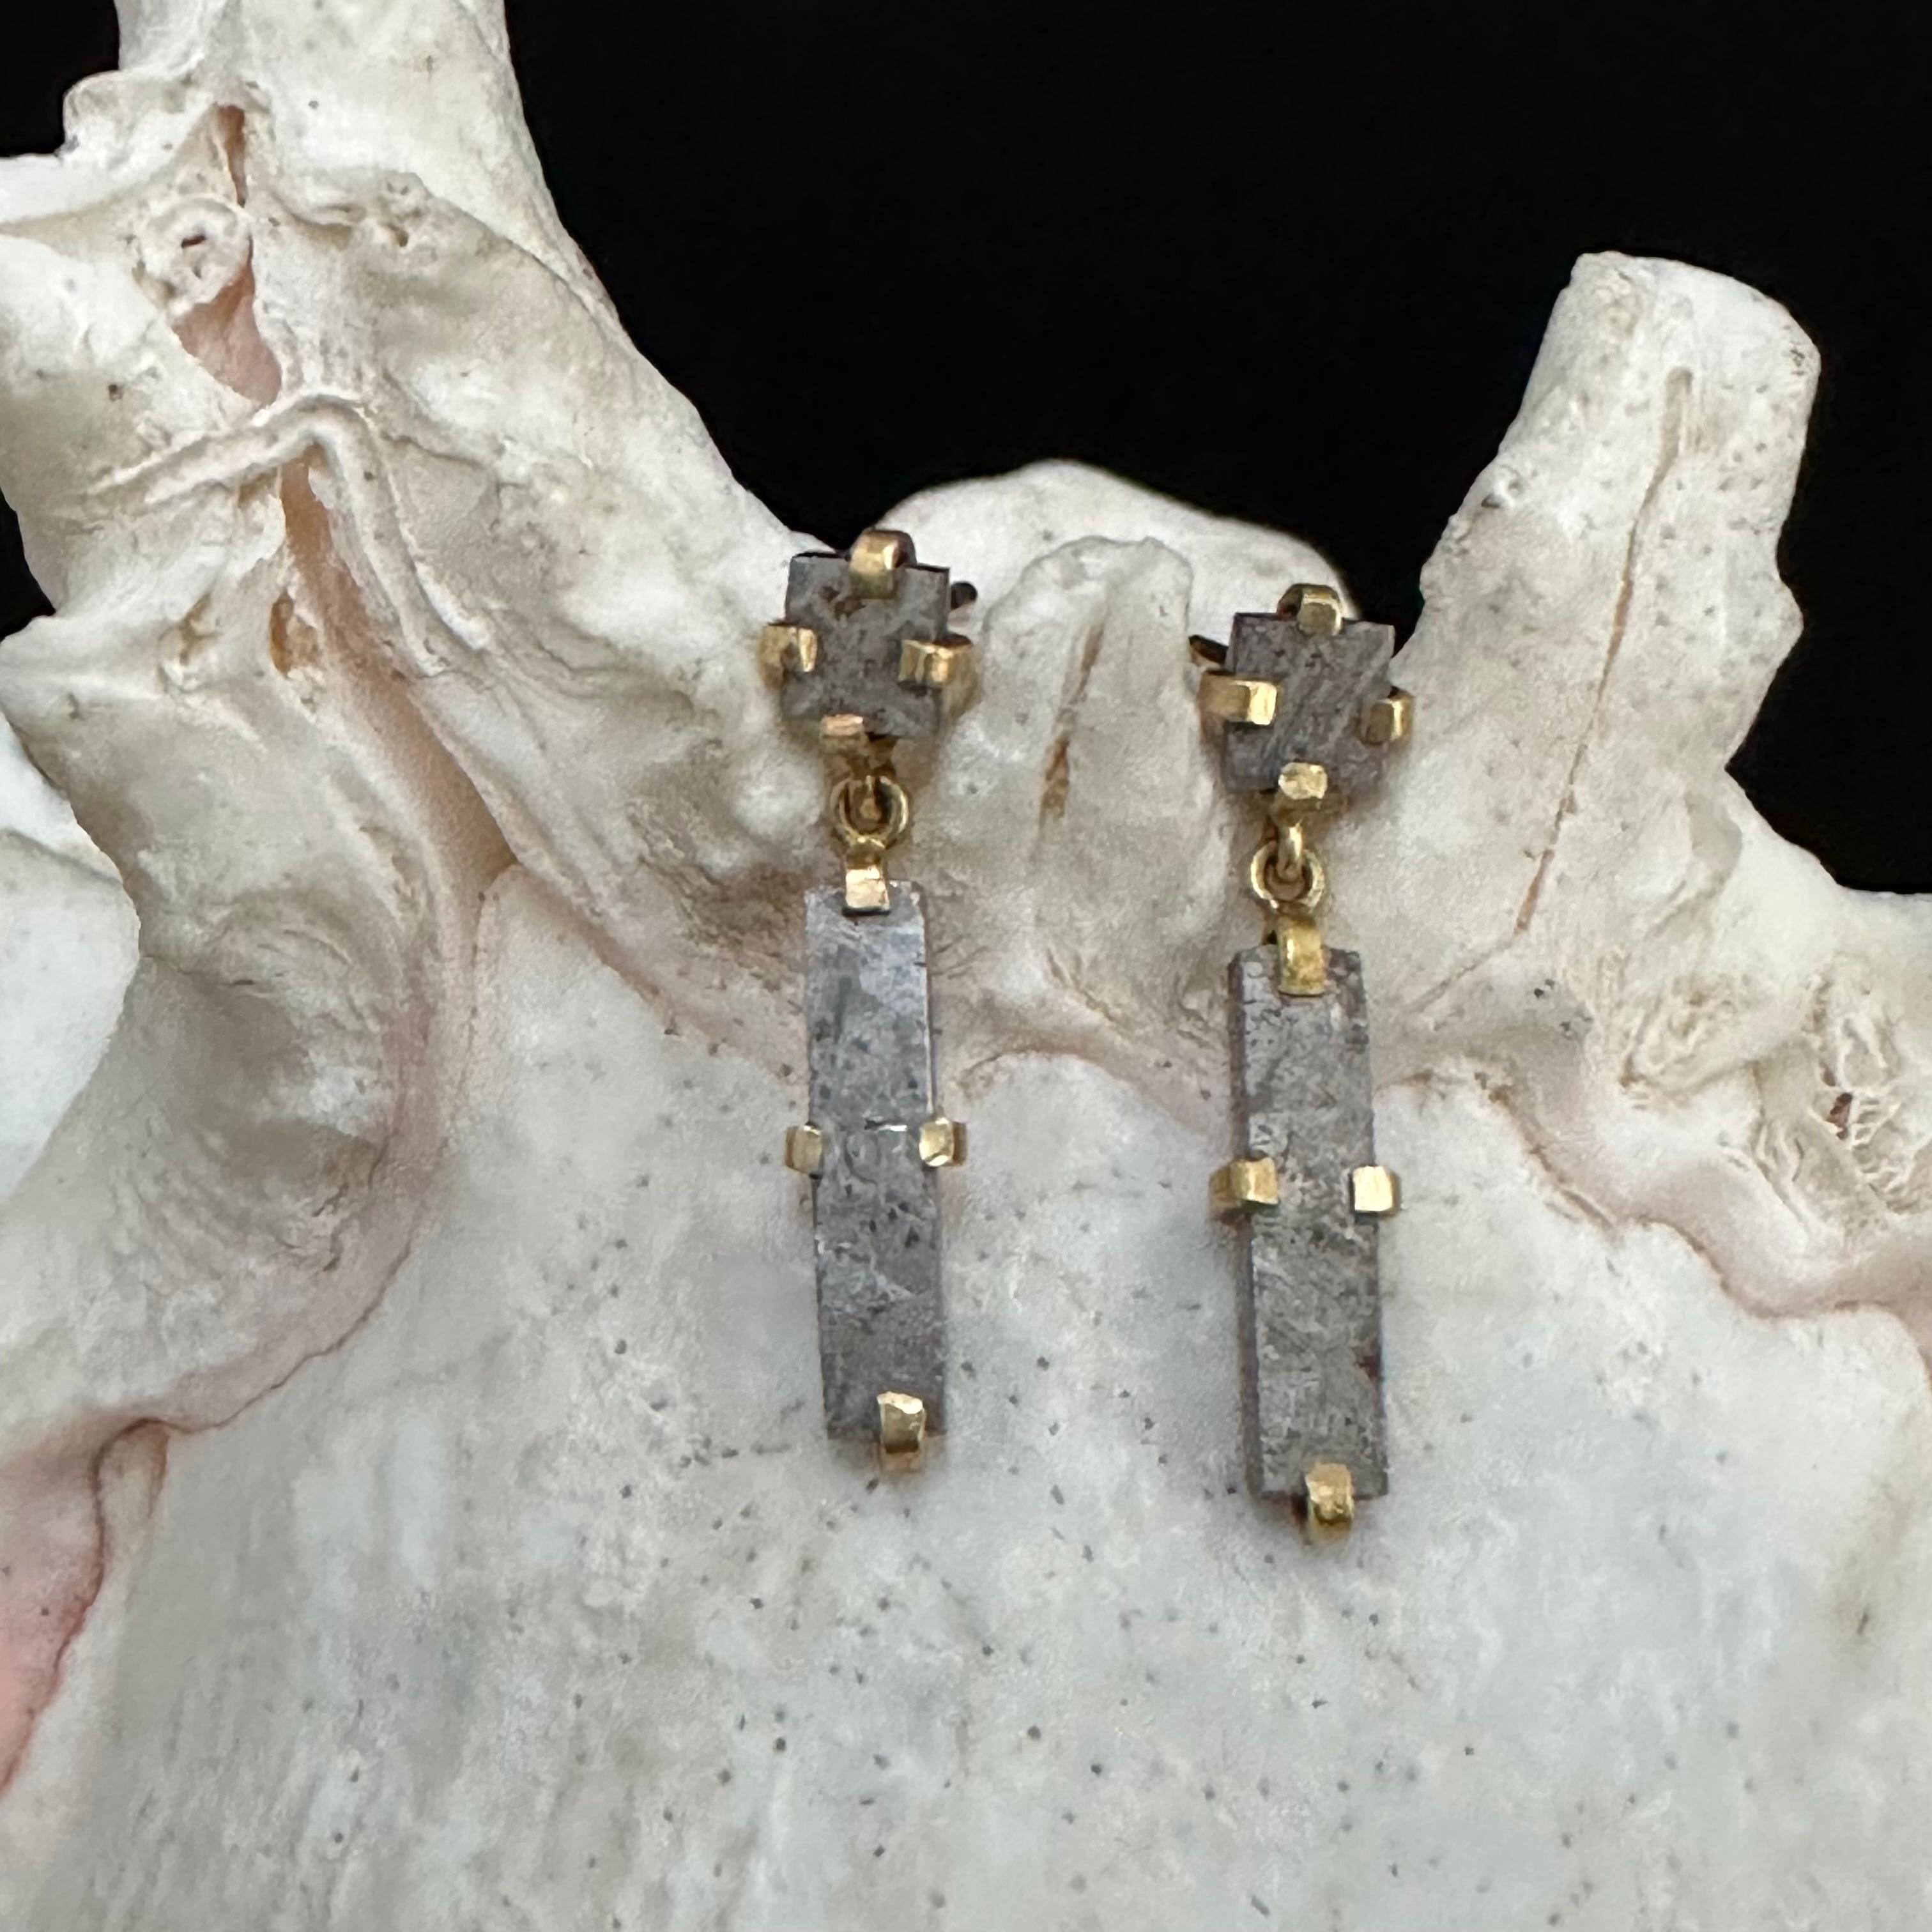 5 mm square and 5 x 20 mm rectangular cut slices of Gibeon meteorite are set within 18K gold clasps to create this interesting and unique post earring design.  The Gibeon meteorite(s) fell in prehistoric times in Namibia and was a huge event